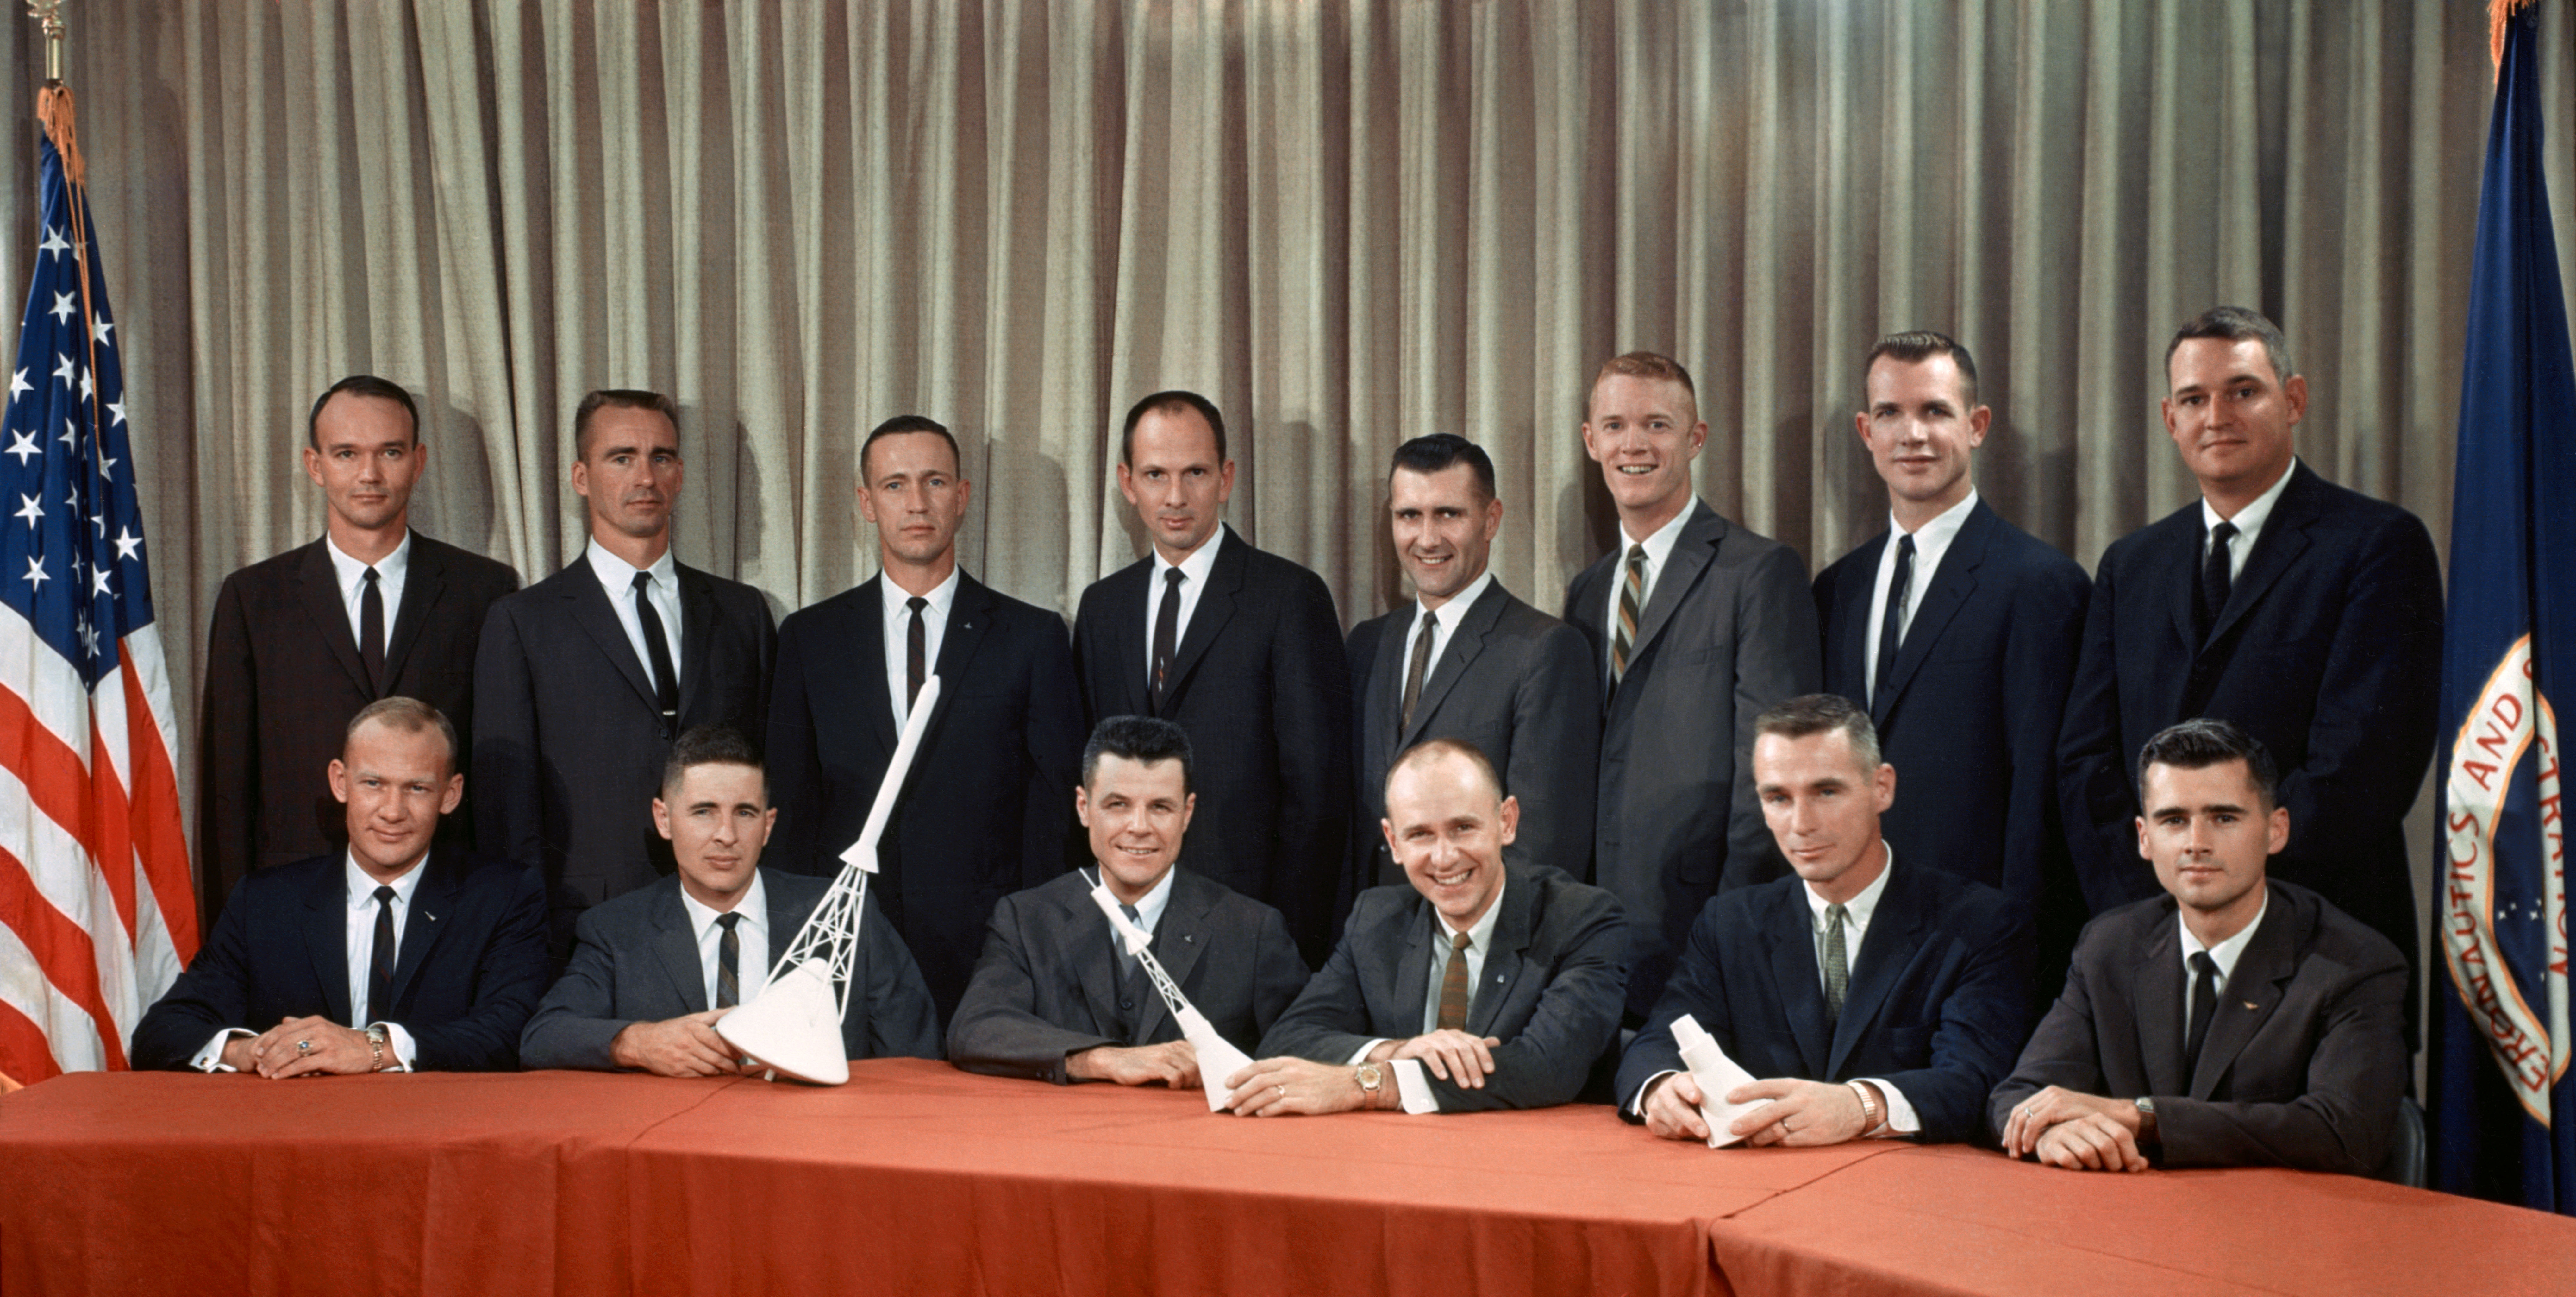 Group 3 astronauts pose following their introduction during the Oct. 17, 1963, press conference